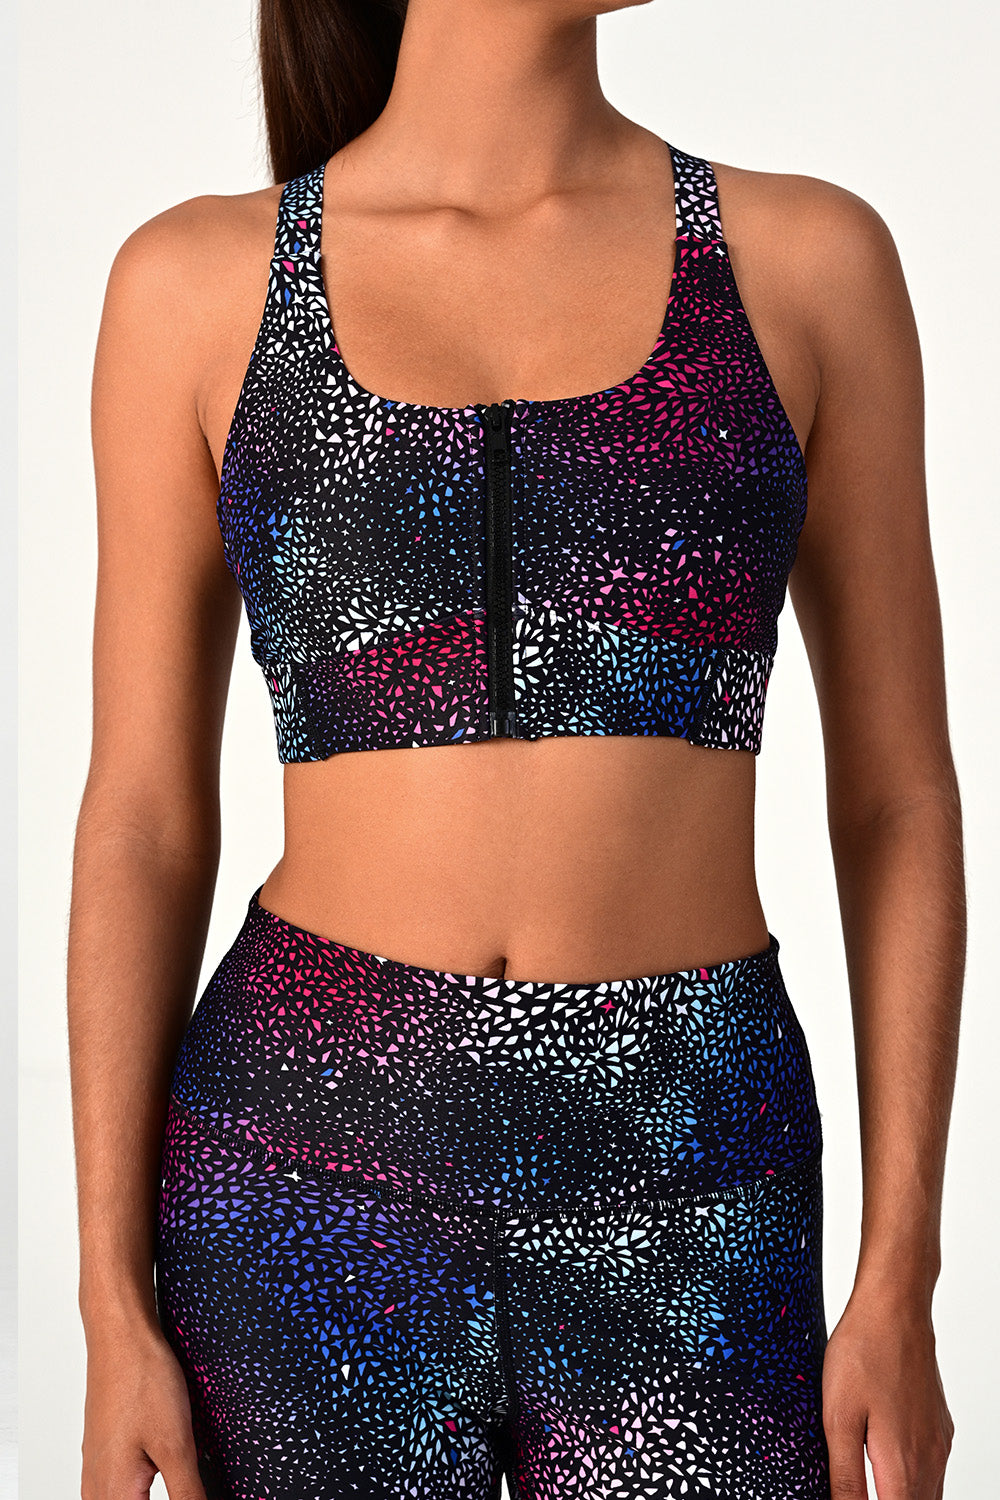 Front view of a woman's body wearing the Soho galaxy active bra top and leggings..